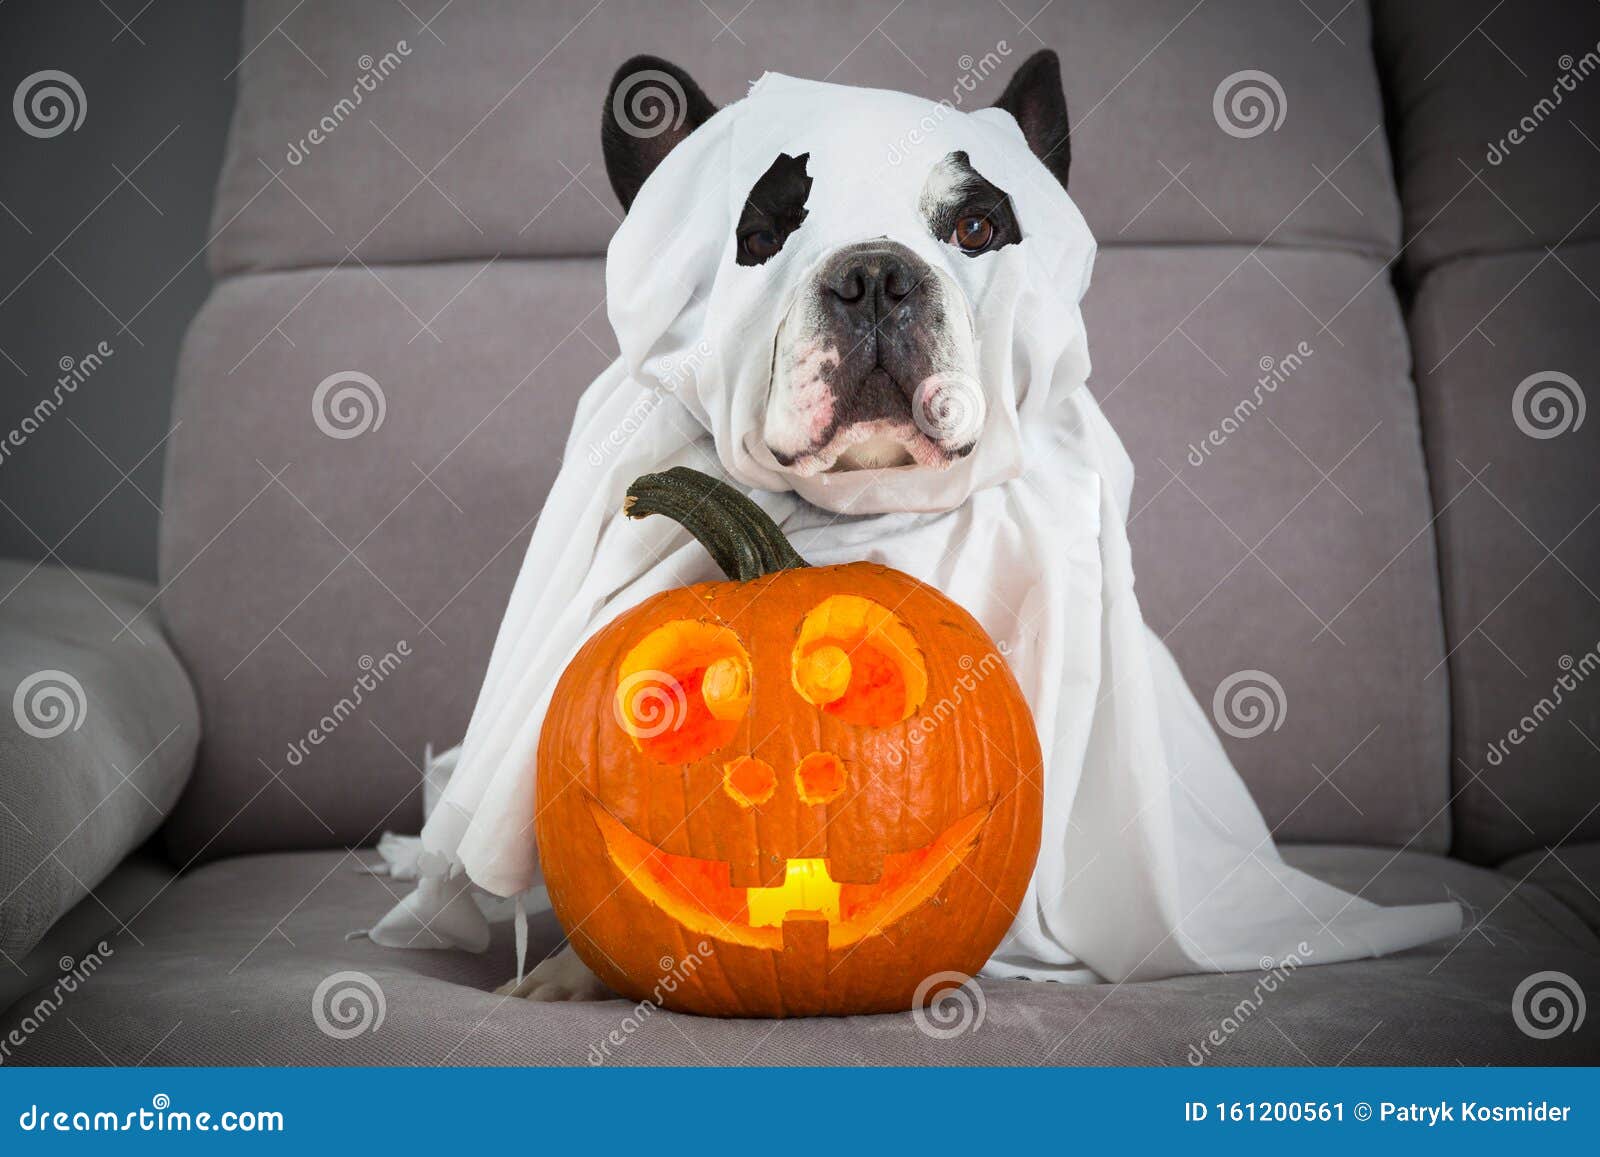 Bugt Daddy tvivl Dog Dressed Up As a Ghost and Halloween Glowing Pumpkin at Home Stock Image  - Image of fall, demon: 161200561